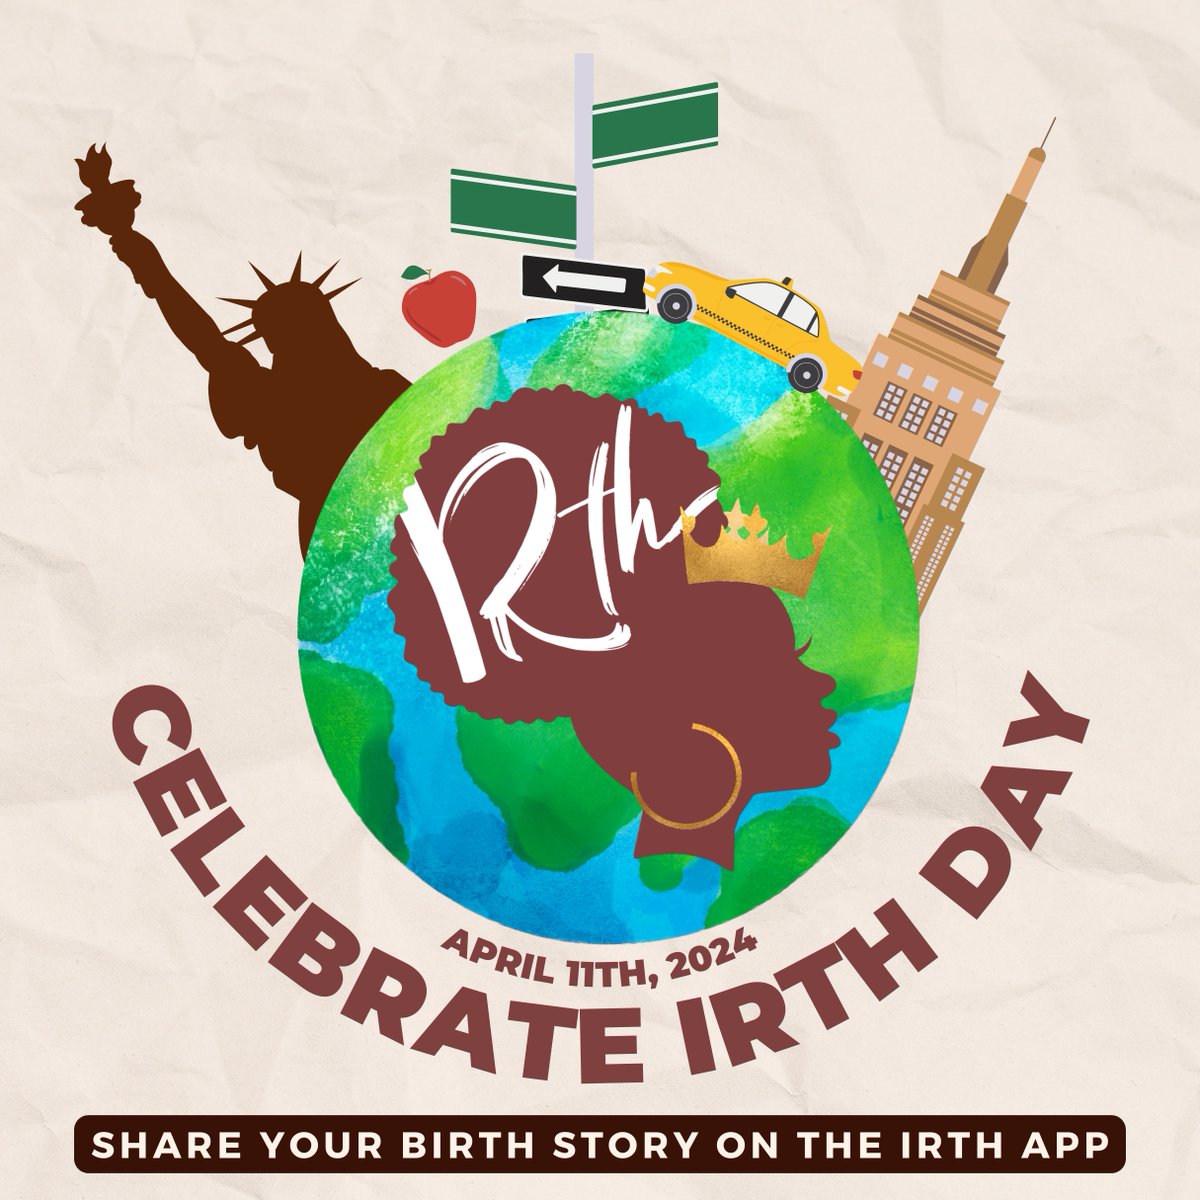 Today is the day! We've been granted a mayoral proclamation for Irth’s Birth Without Bias Day (April 11th)! 🌟🎉 Join us in celebrating by sharing your birth stories and leaving reviews on the Irth App. IrthApp.com #IrthDay #BirthWithoutBias #BirthWithIrth #BMHW24